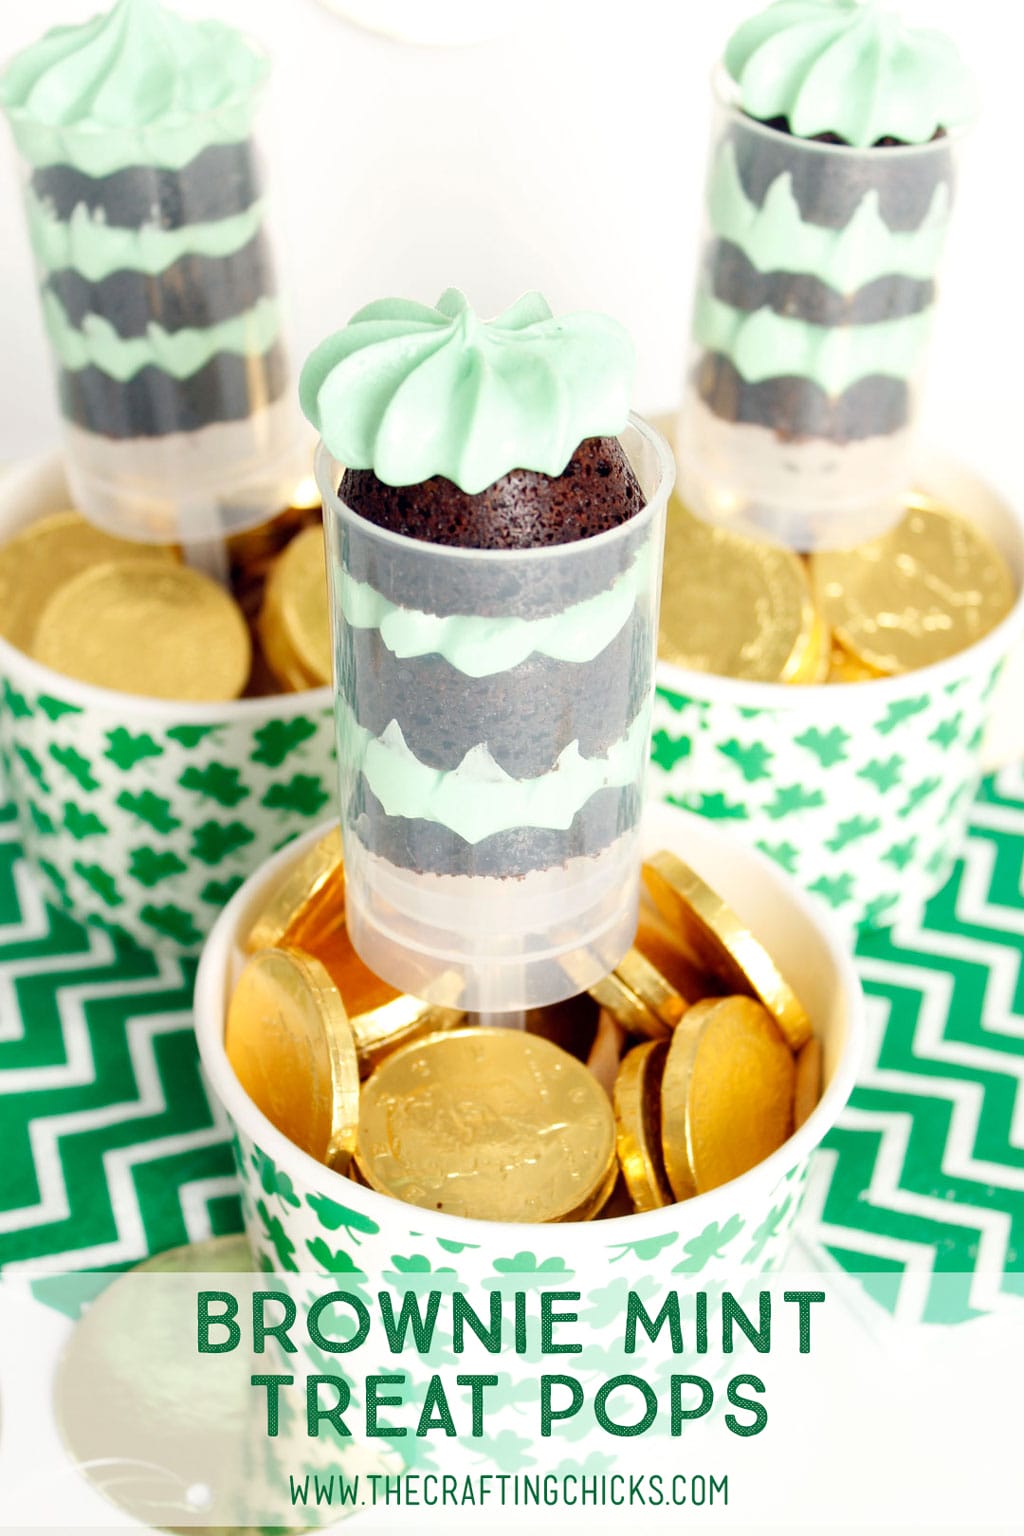 Brownie Mint Treat Pops combine the delicious flavors of chocolate and mint in a fun package. The treat pops offer the perfect serving for any occasion.